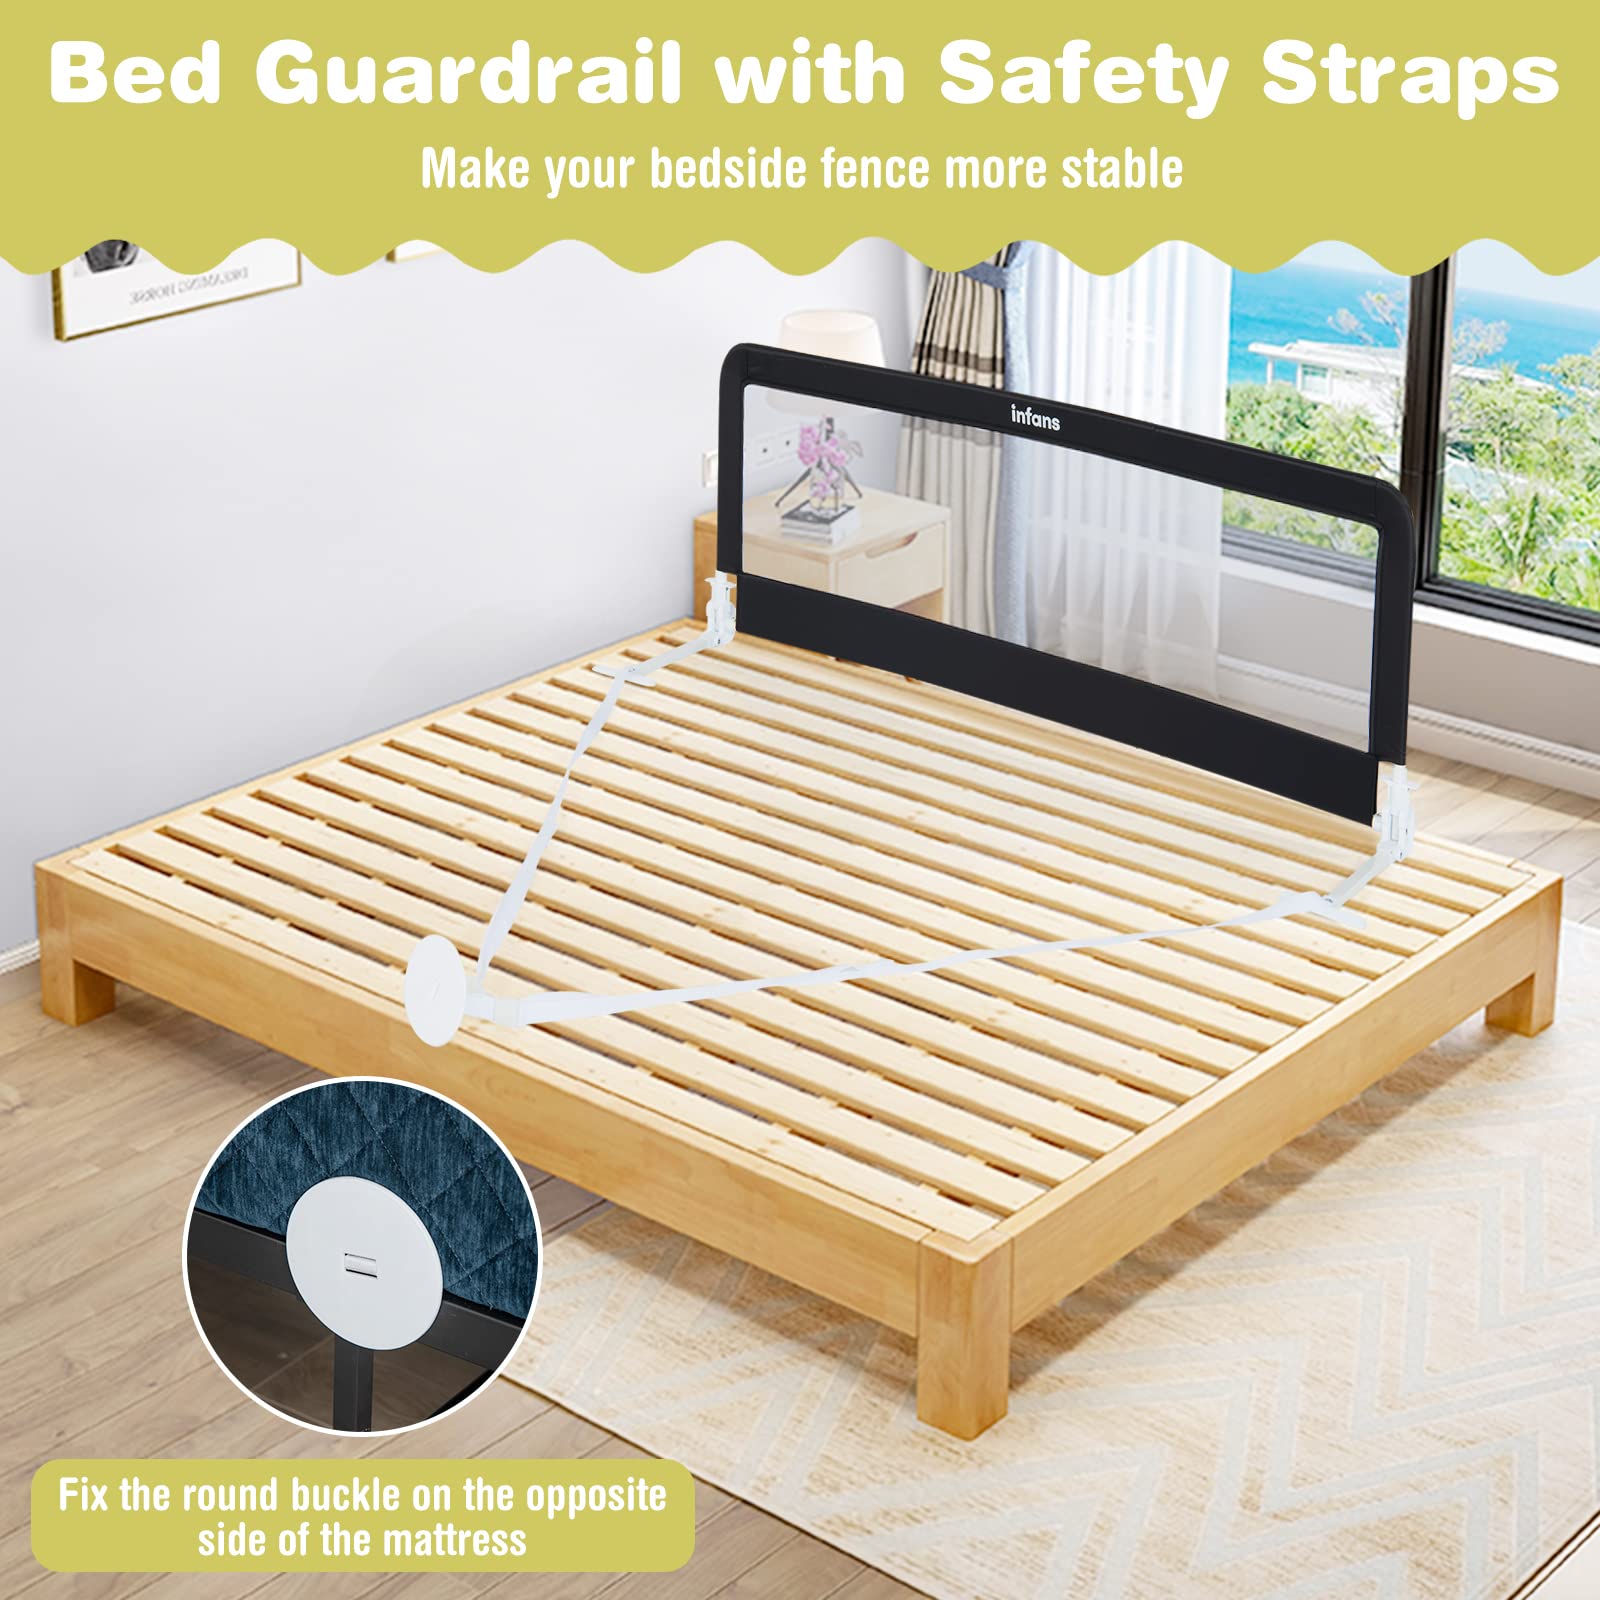 INFANS Bed Rails for Toddlers, Foldable Safety Baby Crib Rail Fit for